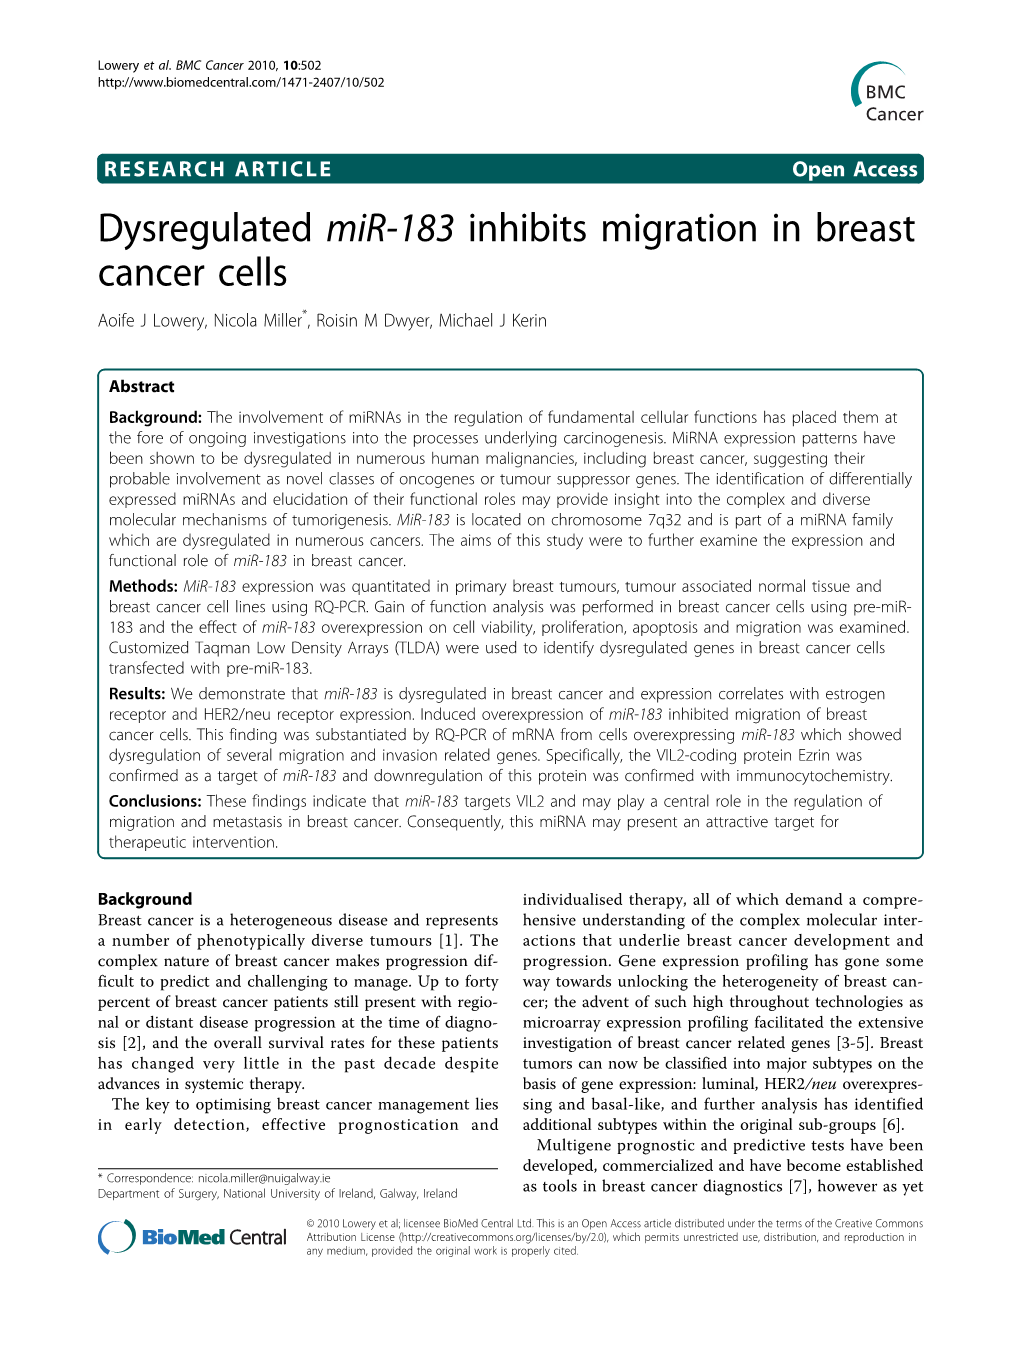 Dysregulated Mir-183 Inhibits Migration in Breast Cancer Cells Aoife J Lowery, Nicola Miller*, Roisin M Dwyer, Michael J Kerin